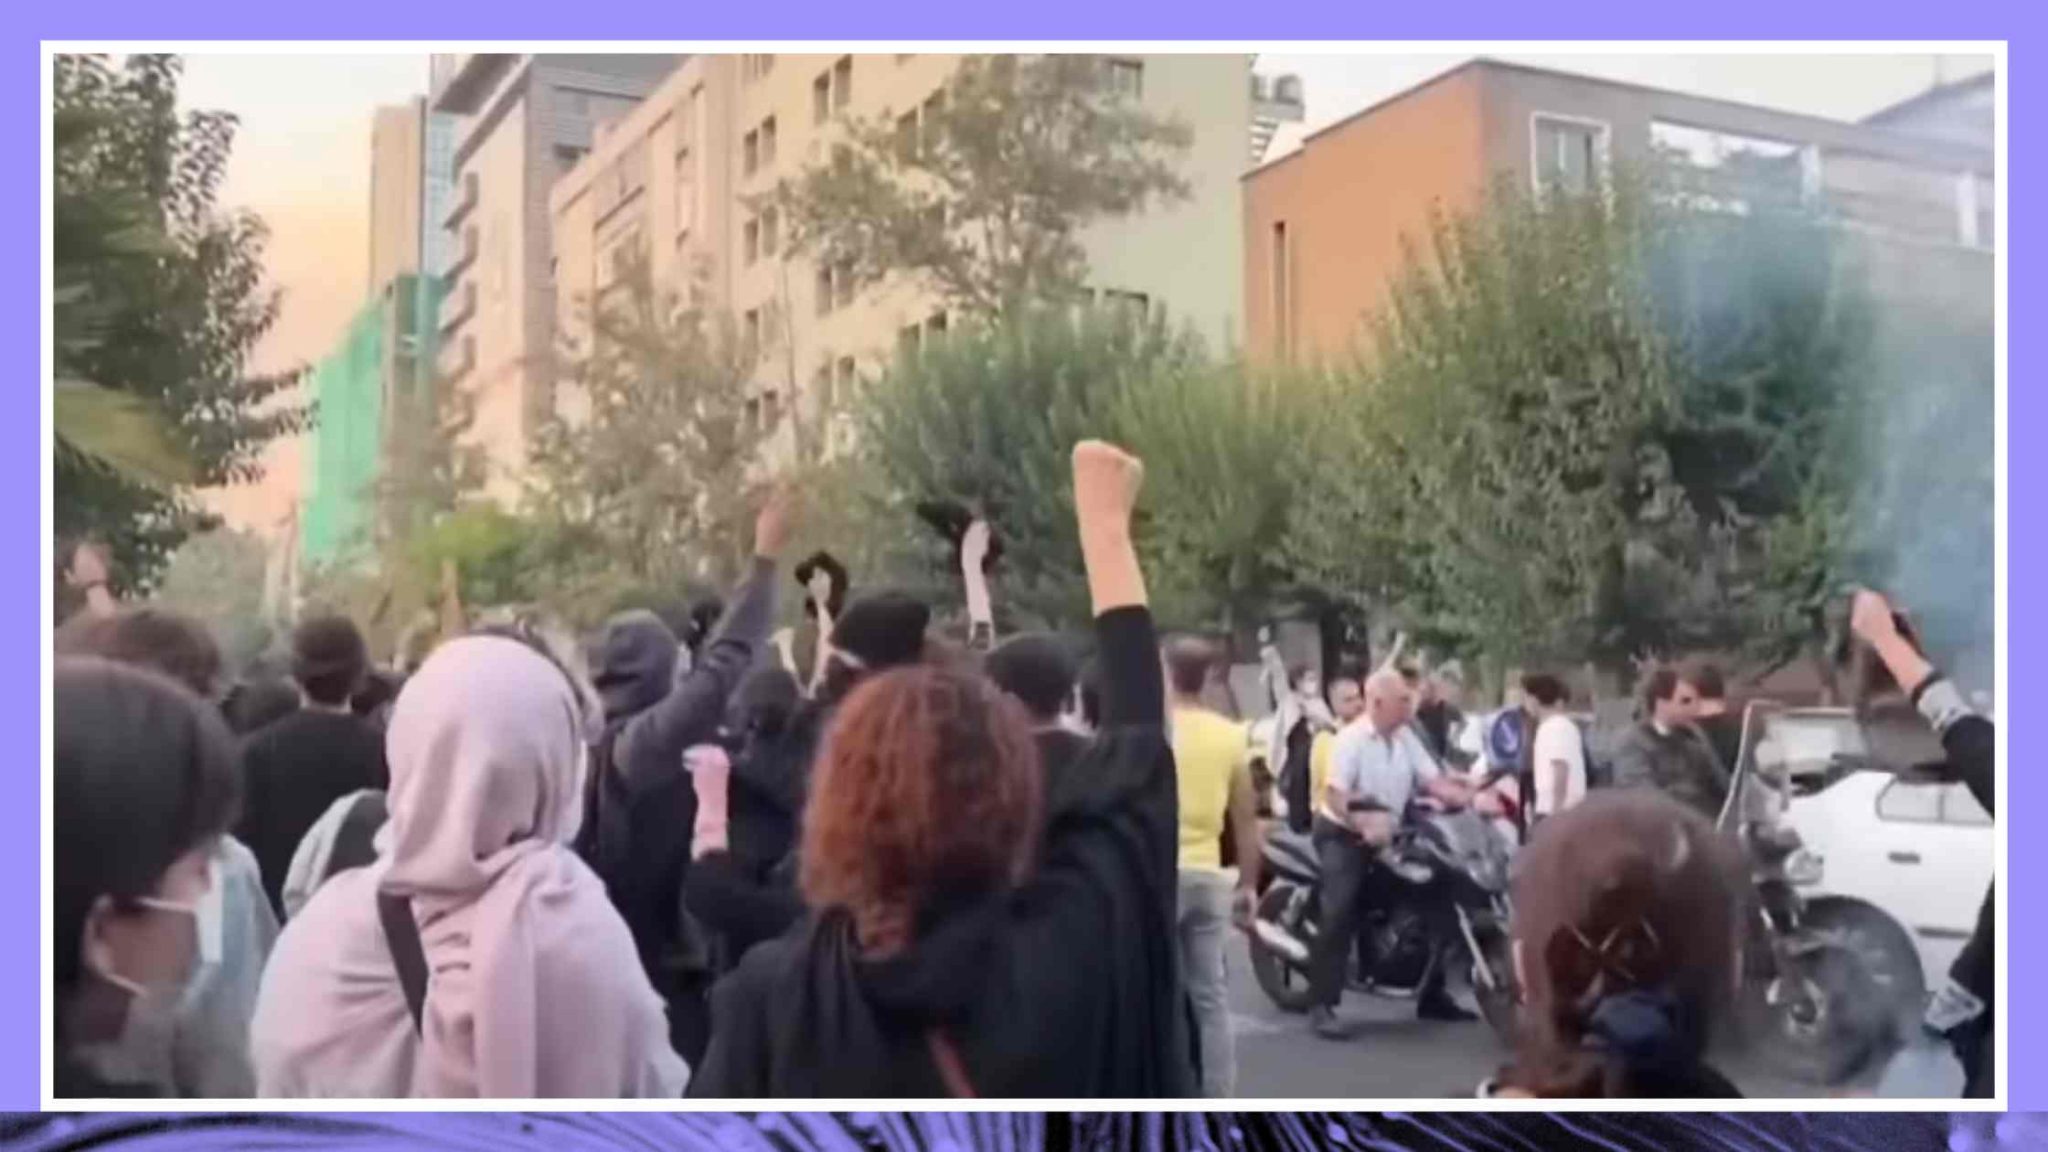 Poisoning of Schoolgirls in Iran Seems to be an ‘Act of Revenge’ for Protesting Transcript